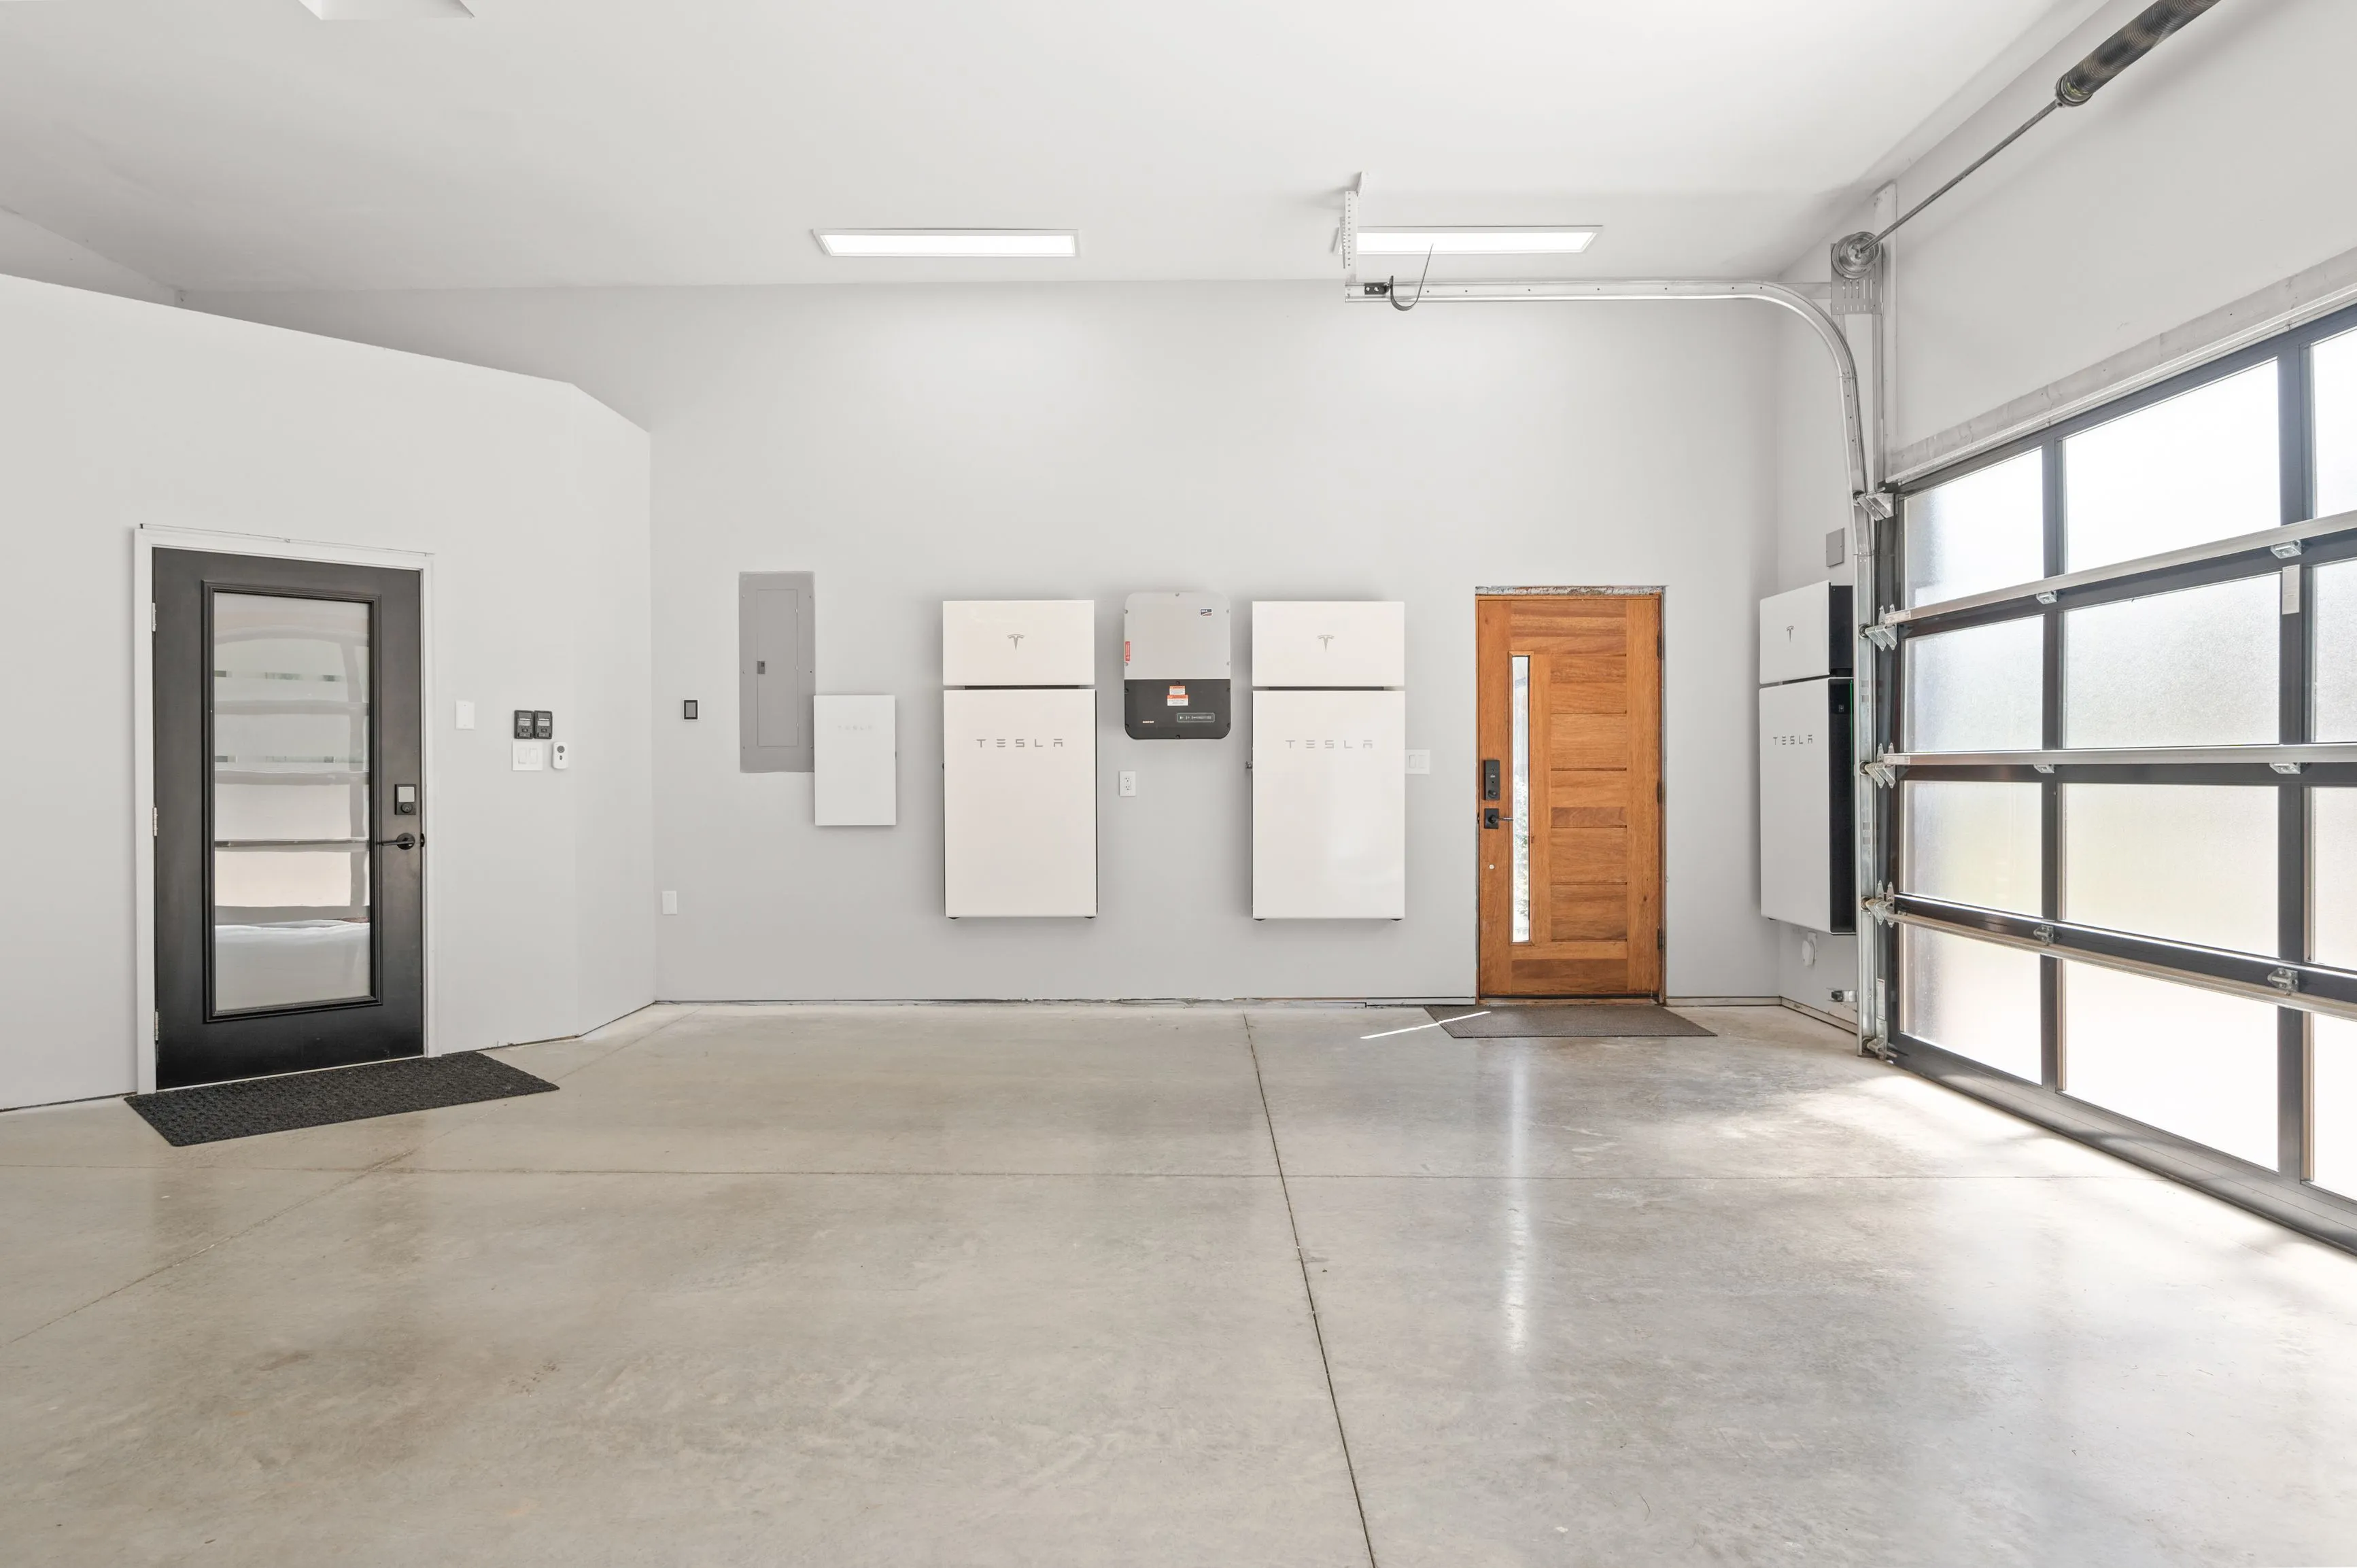 A clean and modern garage interior with a Tesla home battery setup on the wall, a wooden door, and a glass-panel garage door.